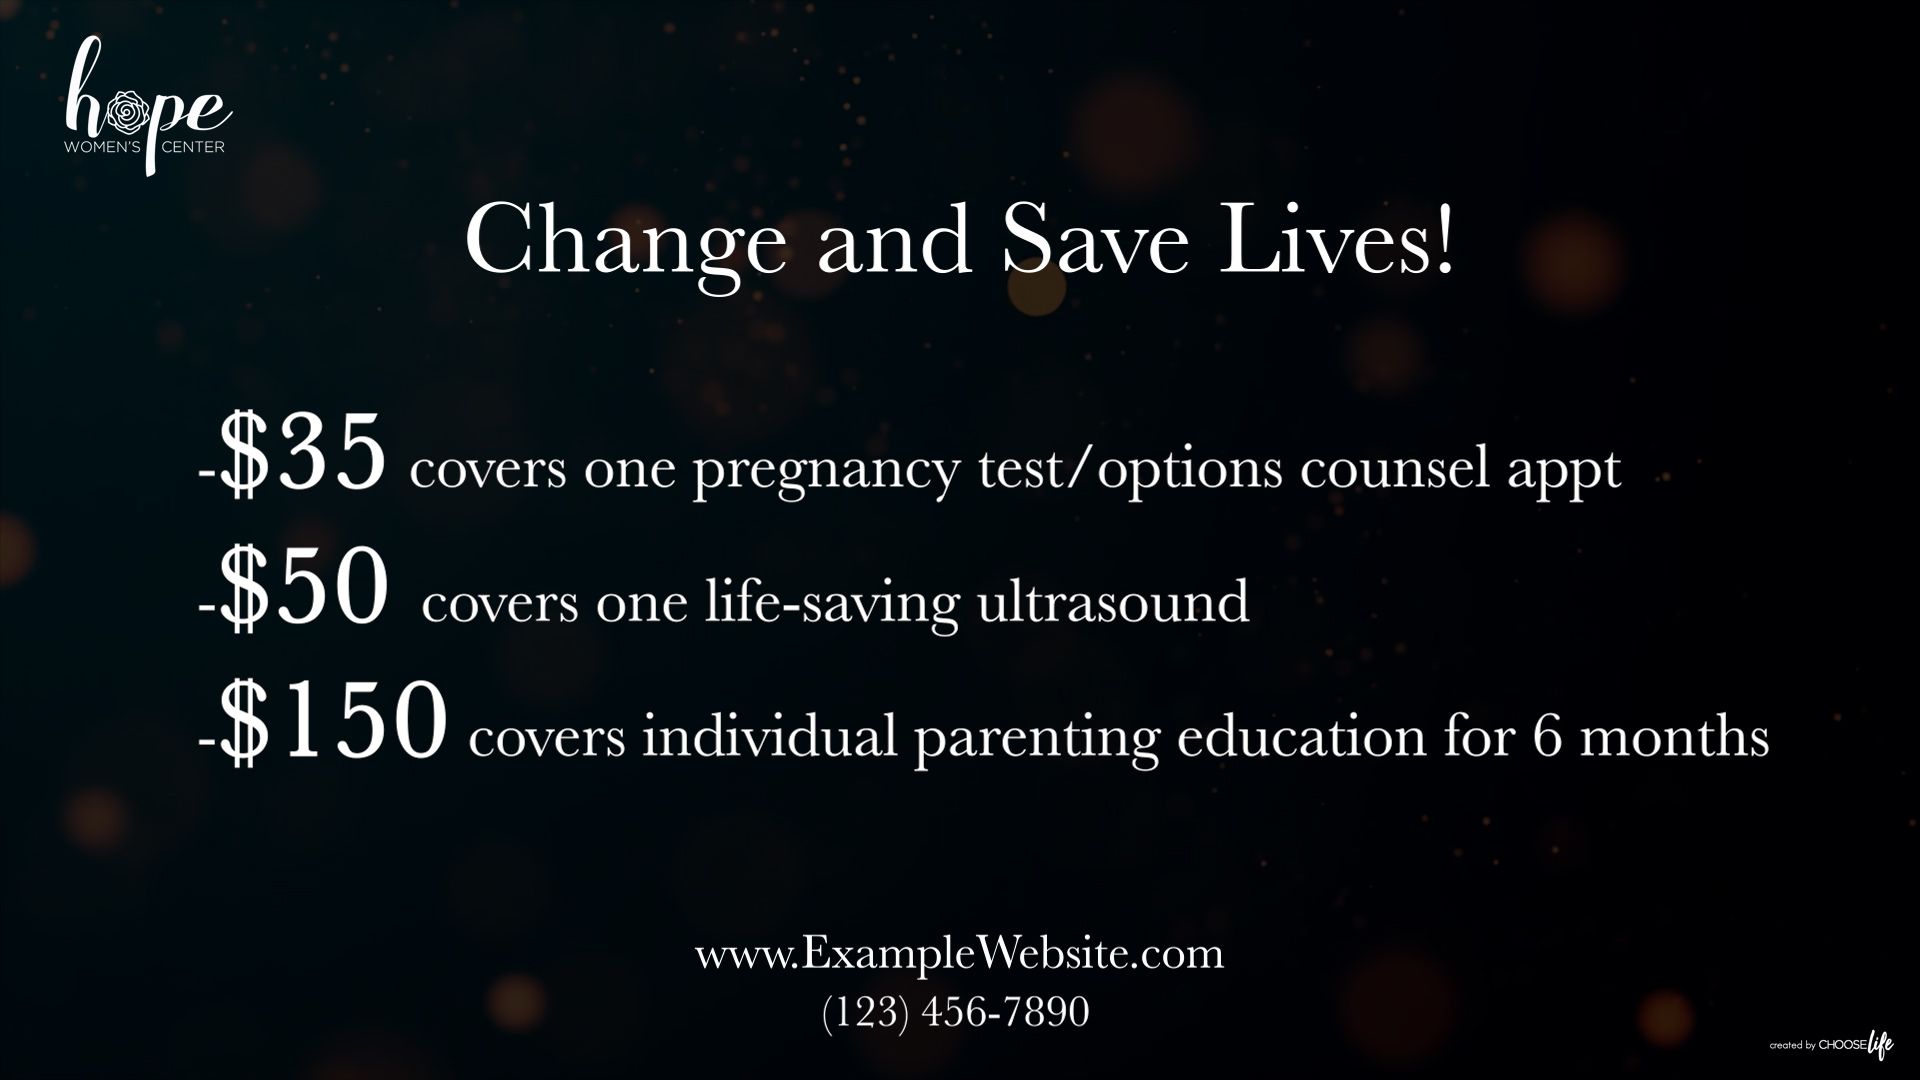 Change and Save Lives (With Logo, Contact Info, and Customized Giving Amounts/Services)